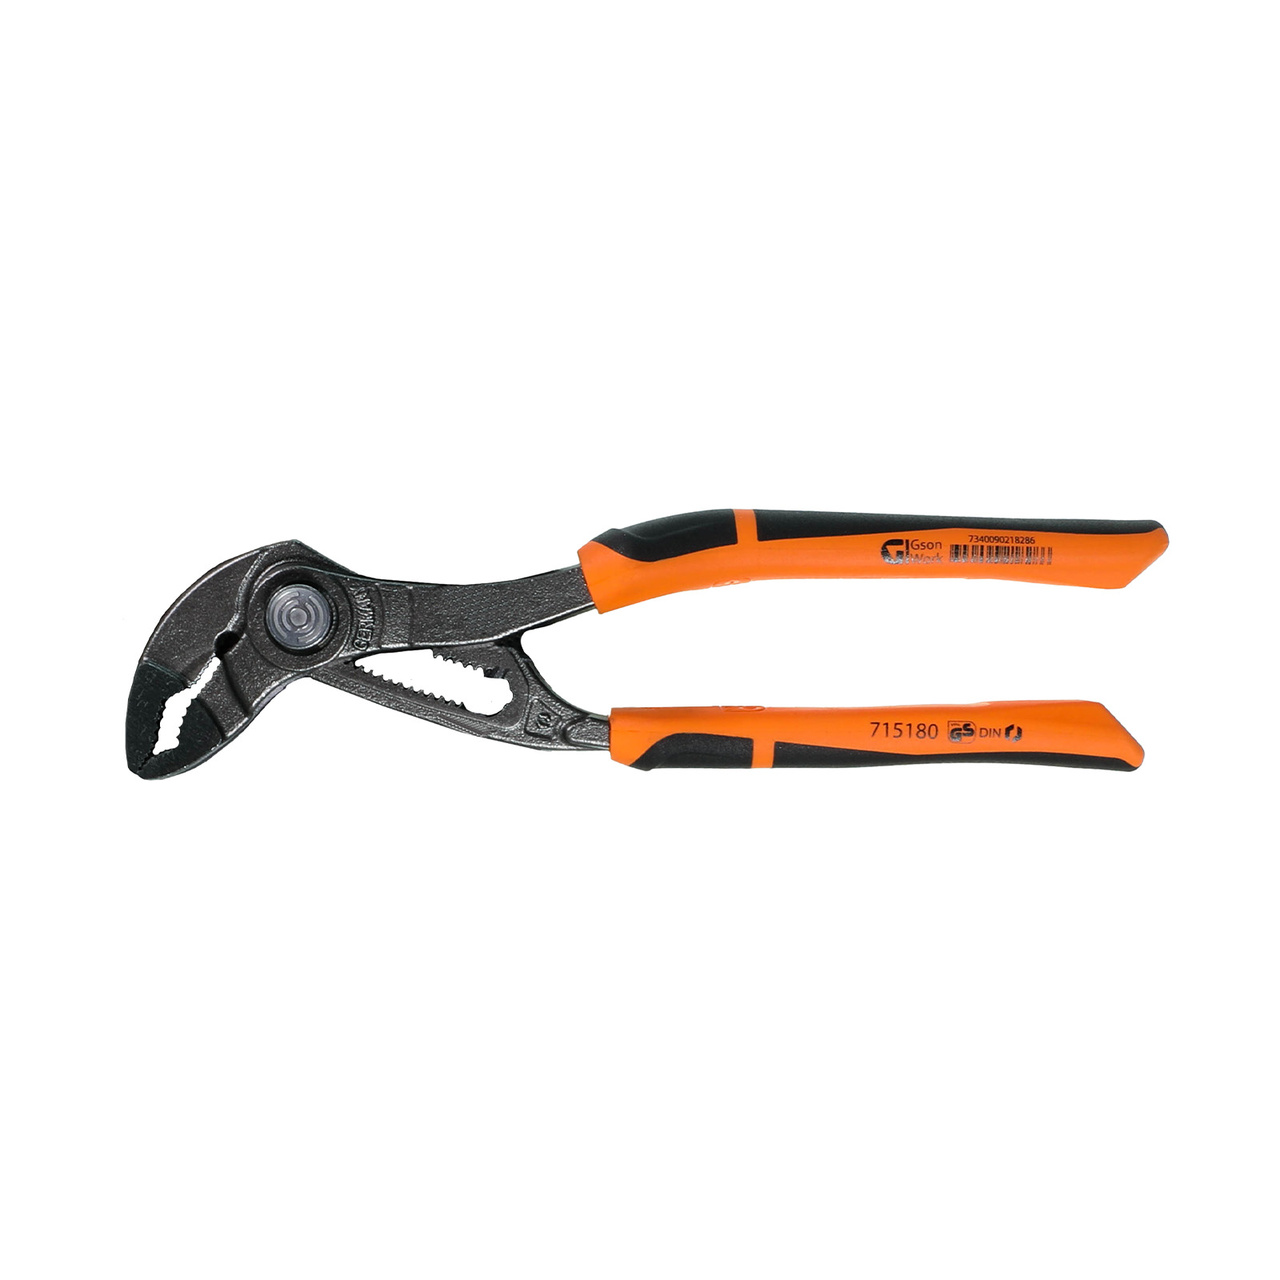 Water Pump Pliers with push-button 180 mm